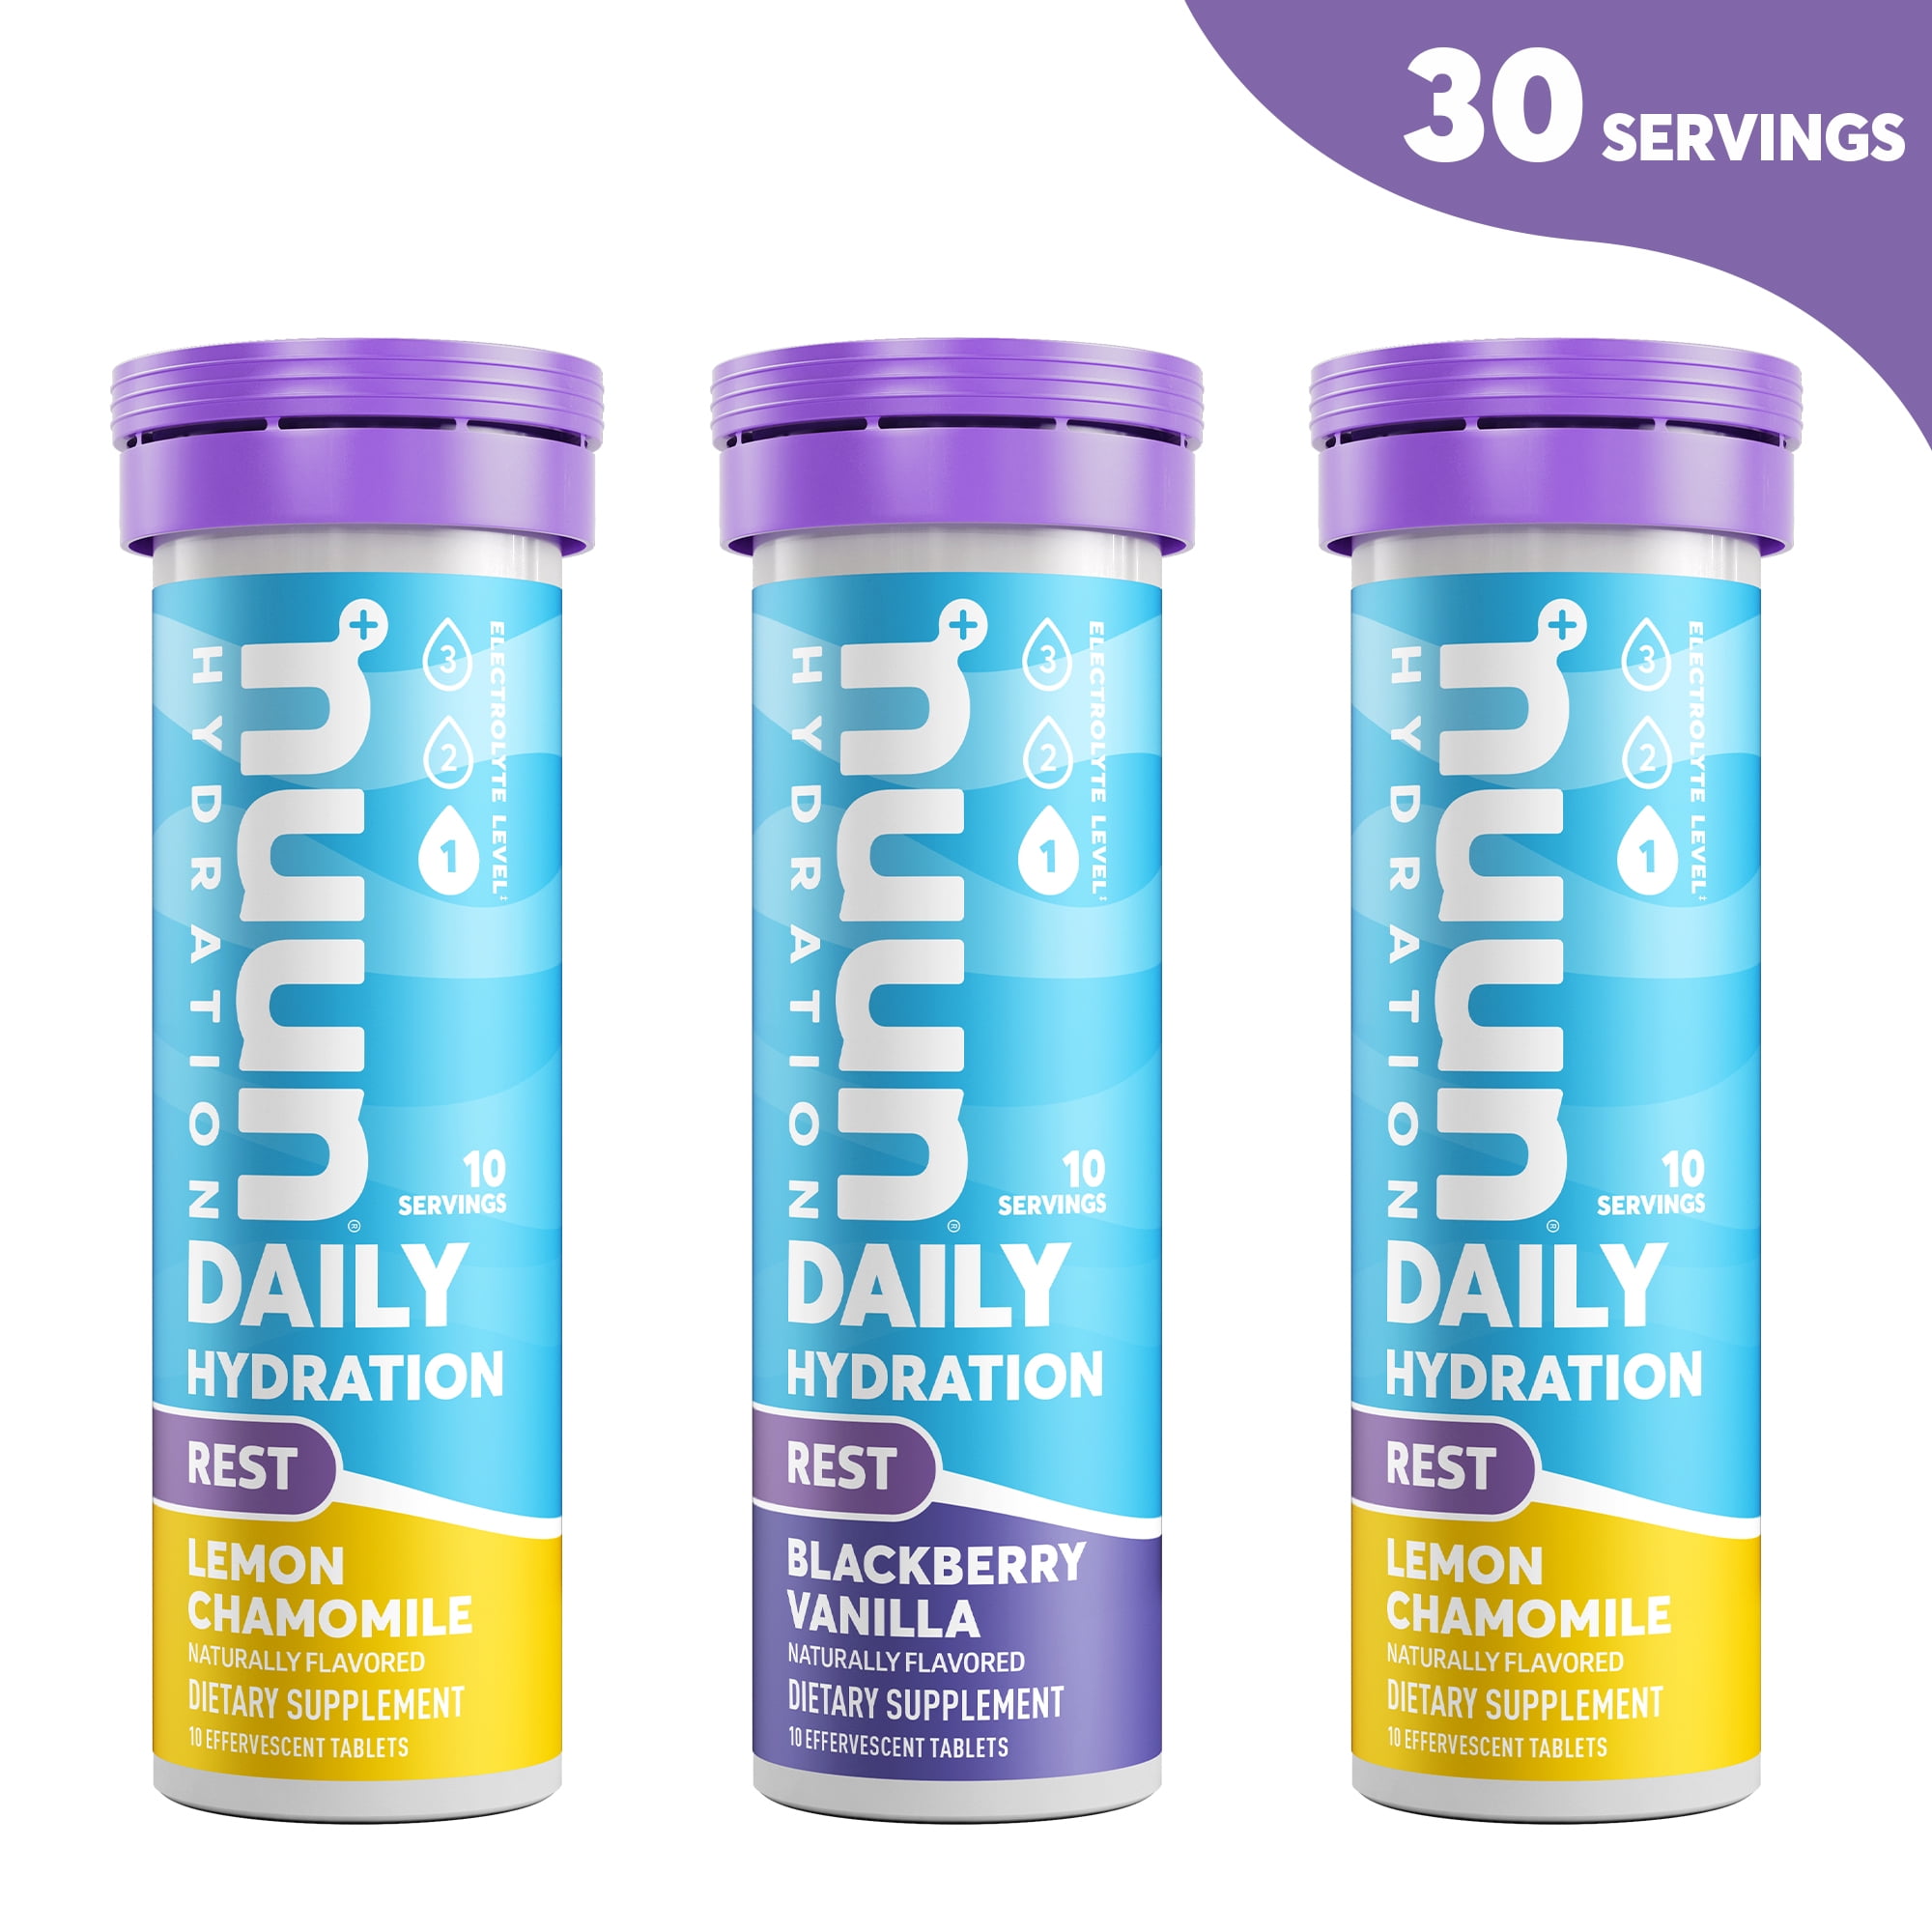 Is Cold Water Bad For You? – Nuun Hydration